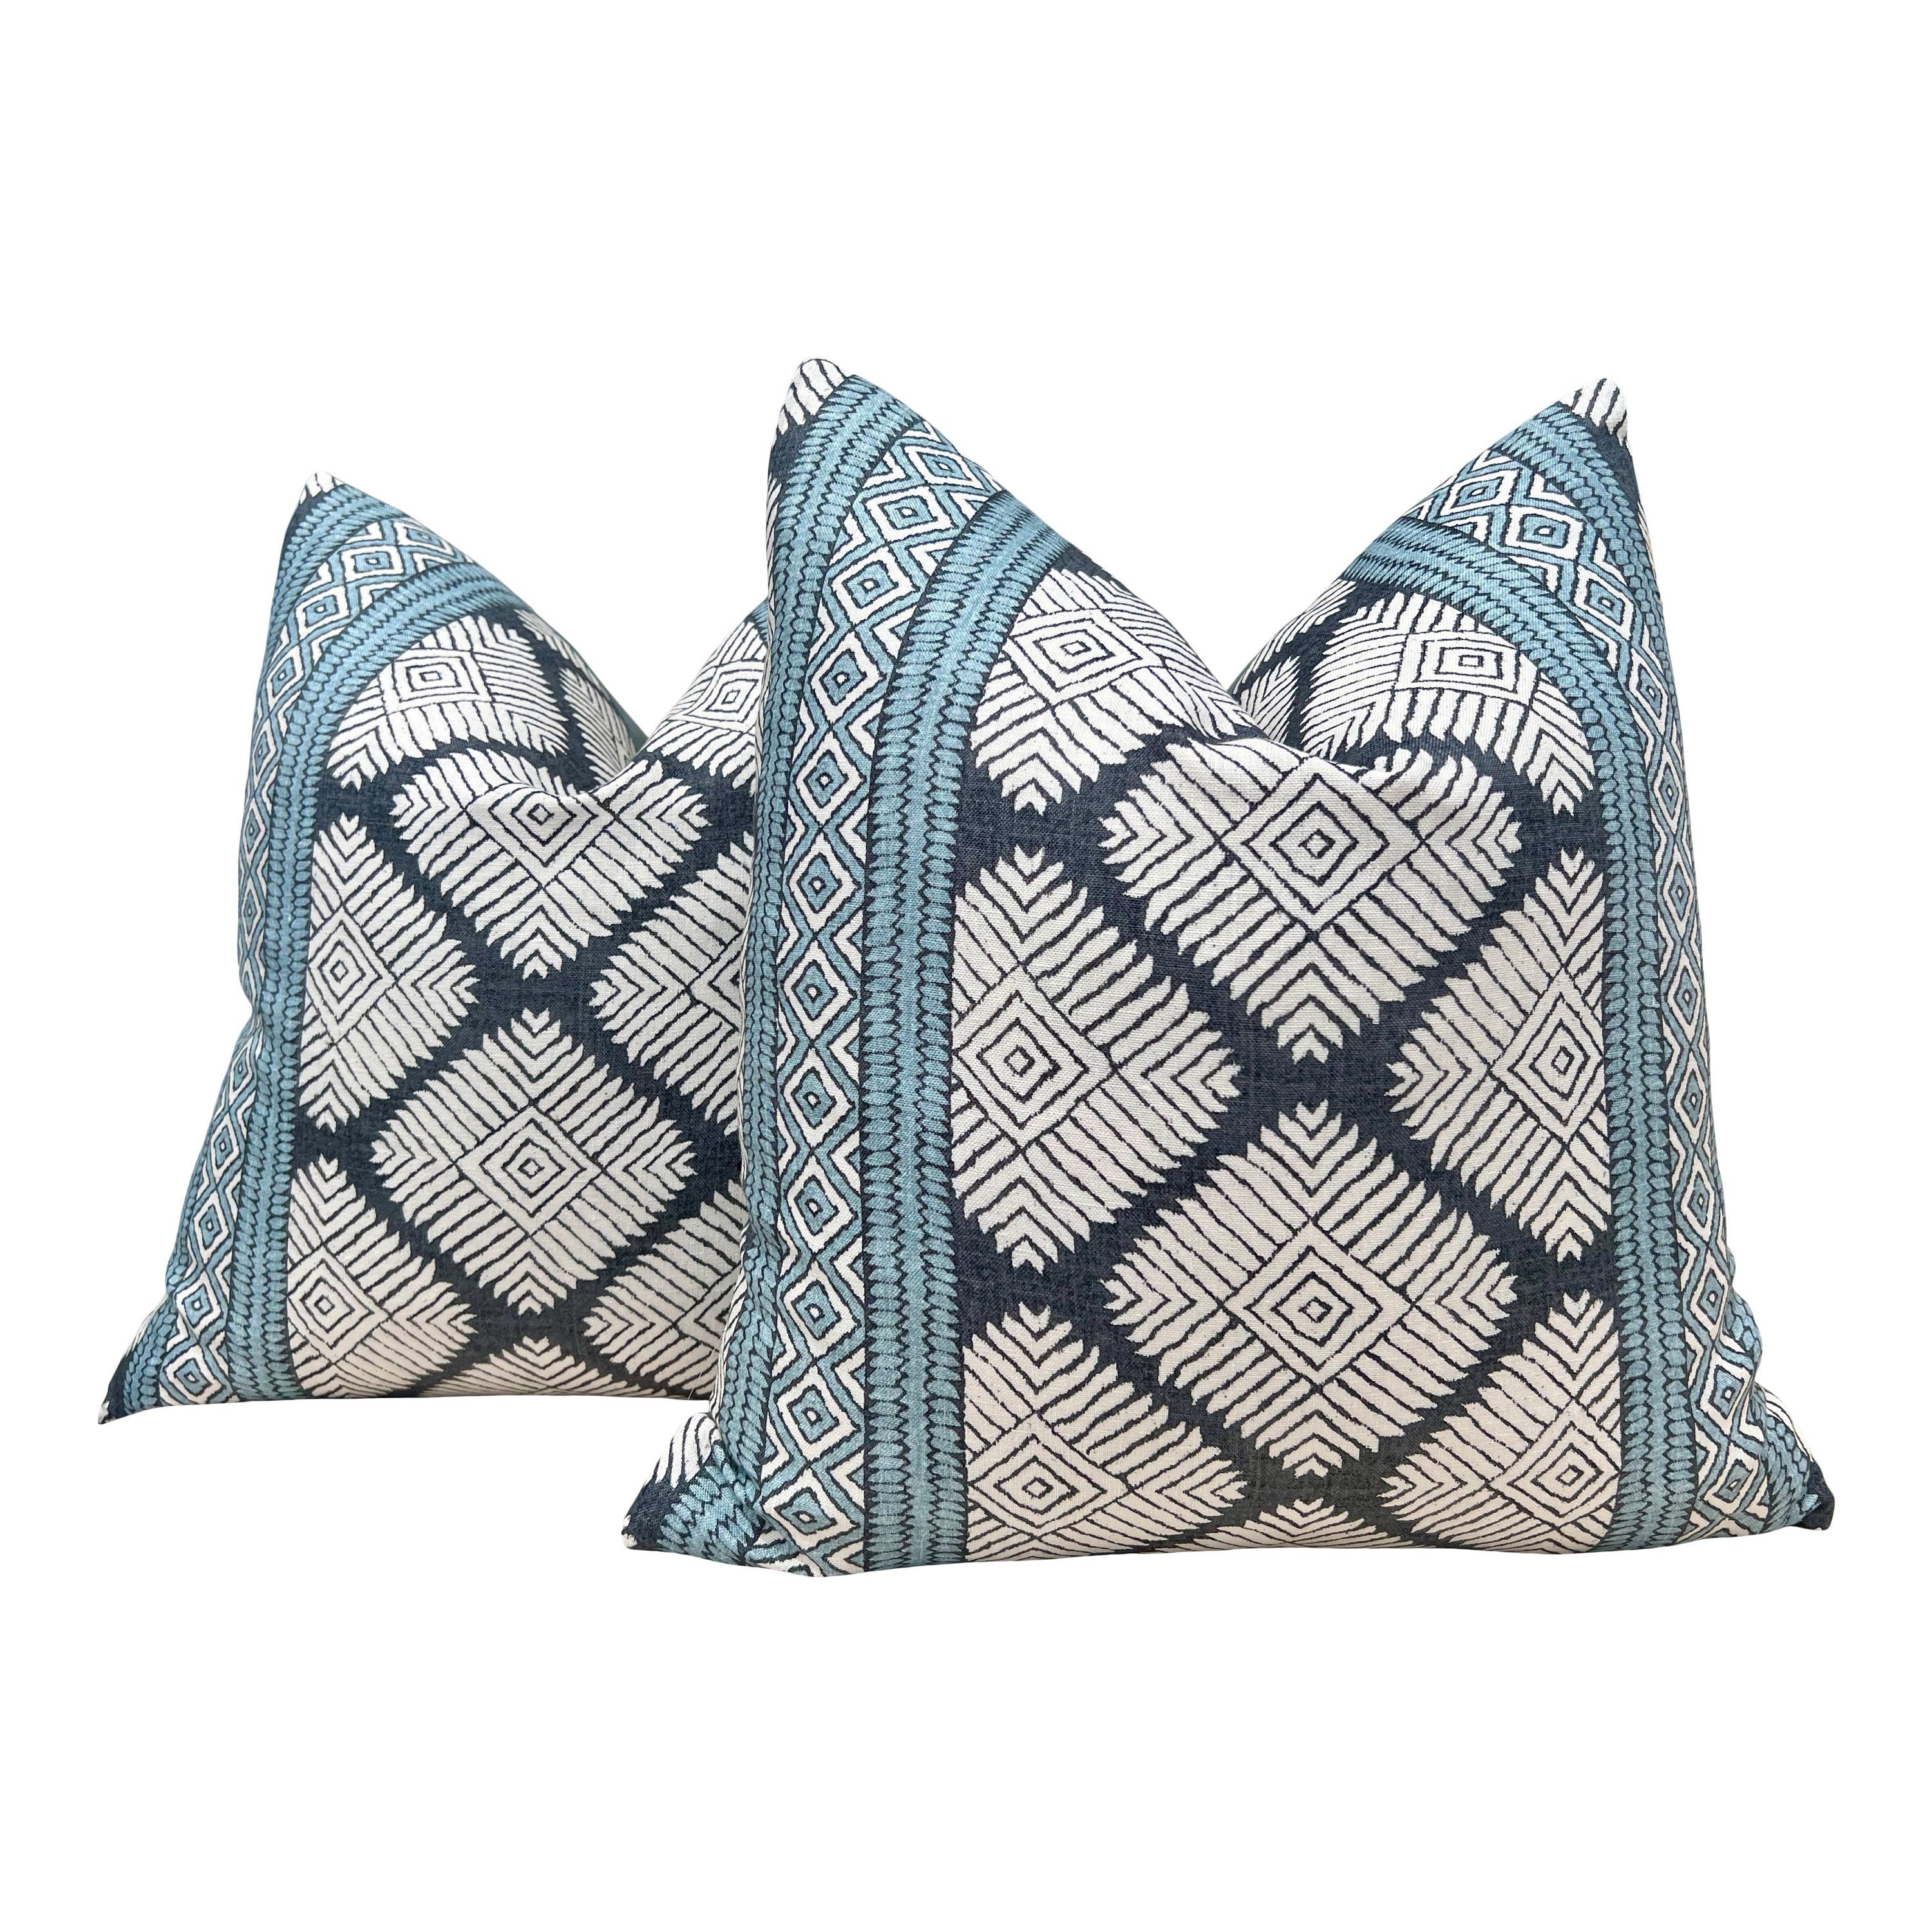 Thibaut Austin Geometric Pillow in Mineral Blue. Blue Pillows in Stripes, Lumbar Geometric Pillow Cover, Euro Sham Covers in Blue